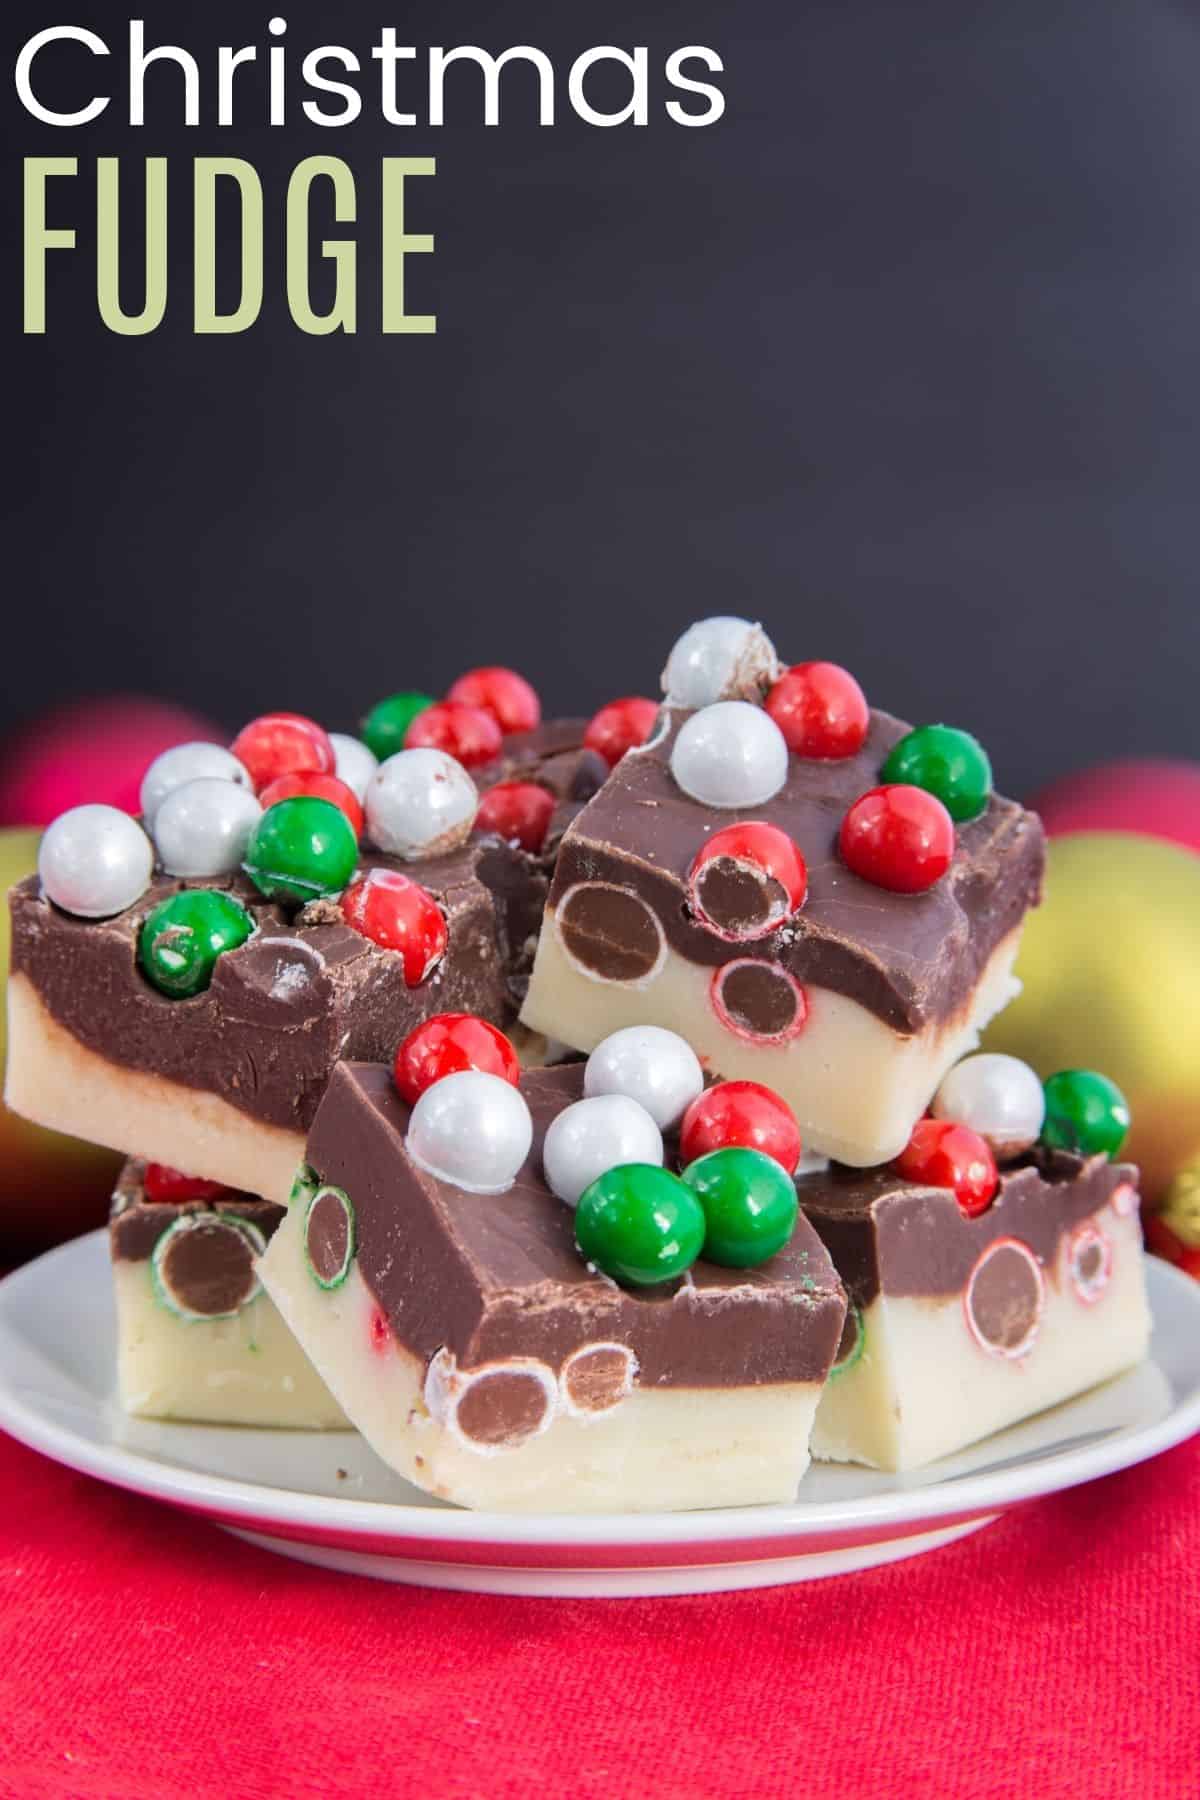 Easy Christmas Fudge Recipe Image with Title